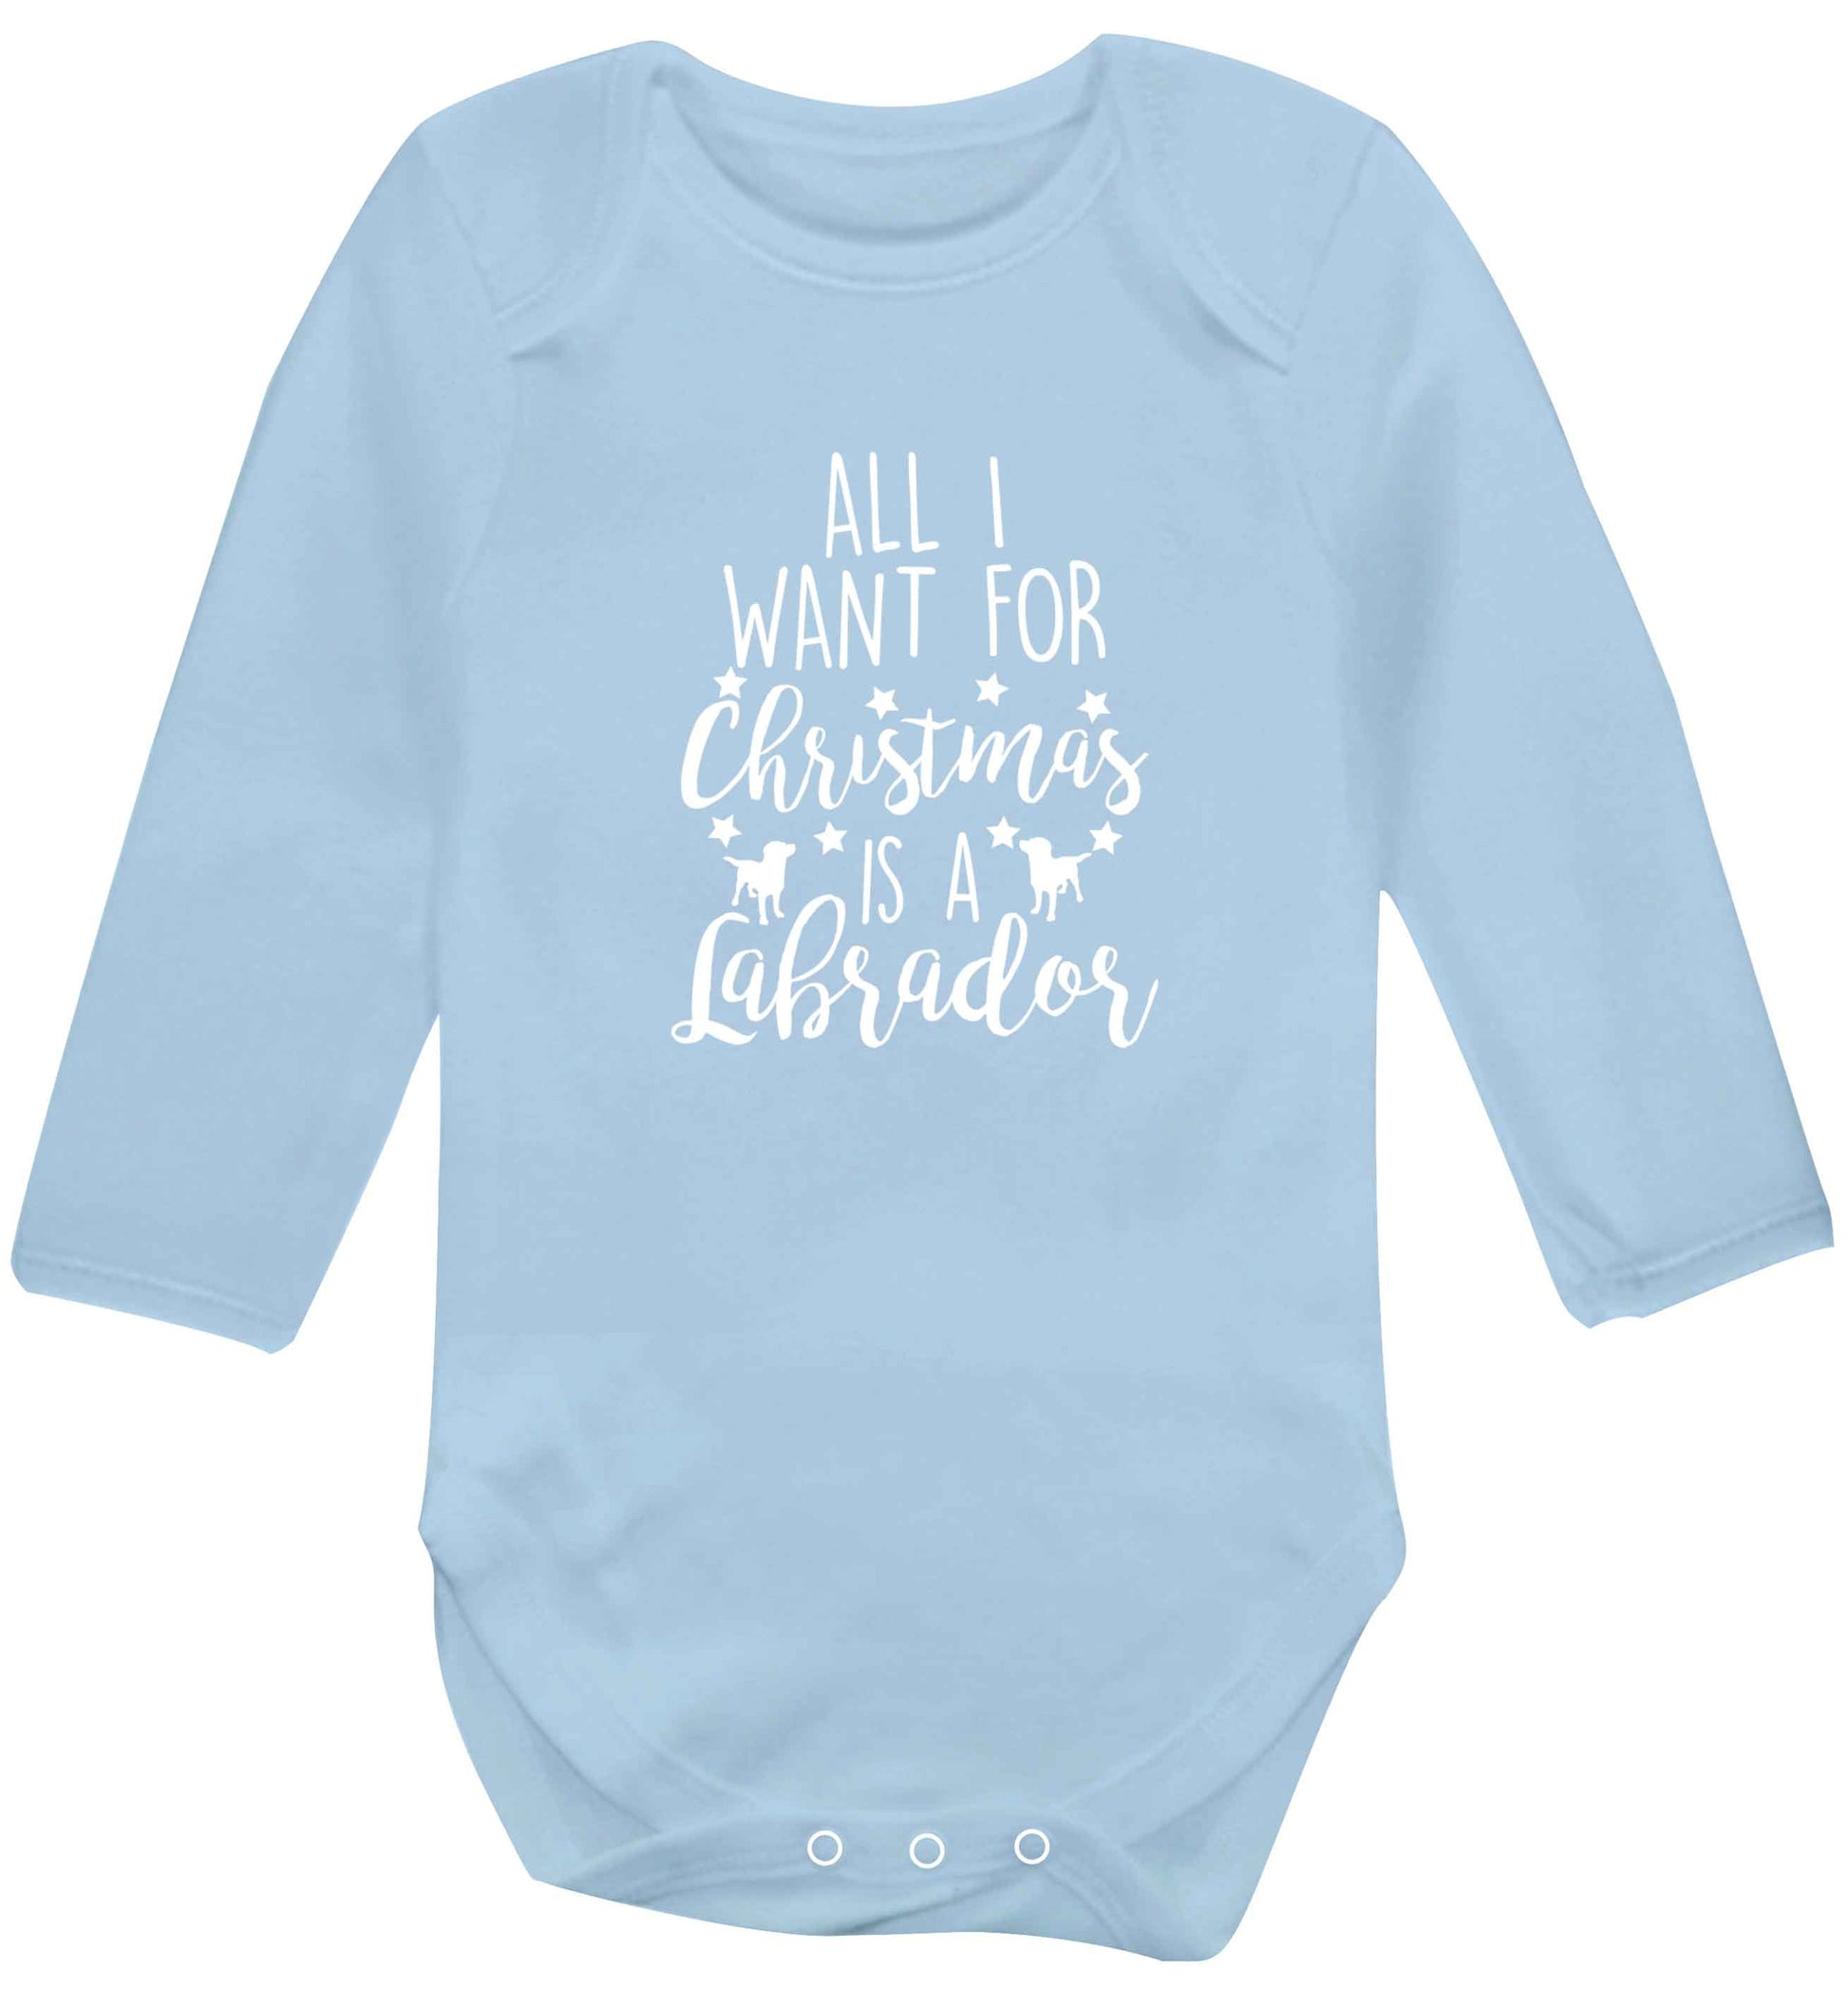 All I want for Christmas is a labrador baby vest long sleeved pale blue 6-12 months